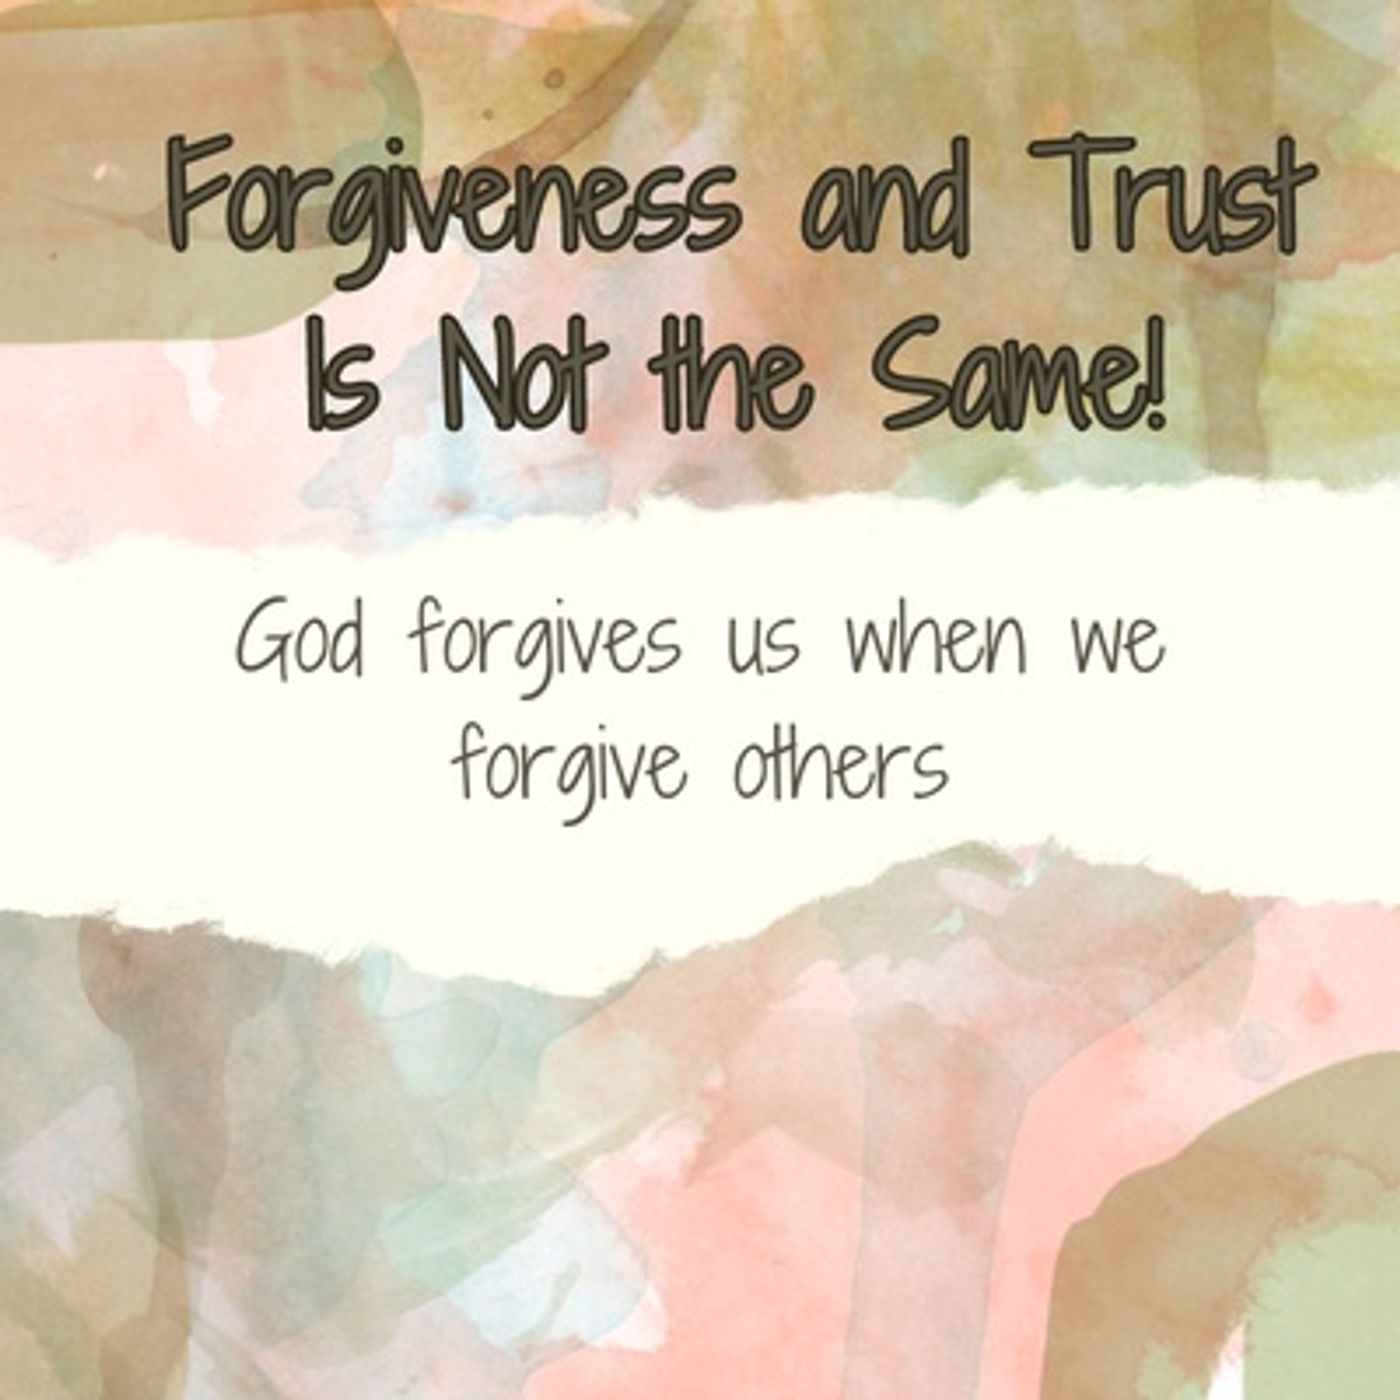 Forgiveness and Trust Is Not The Same!